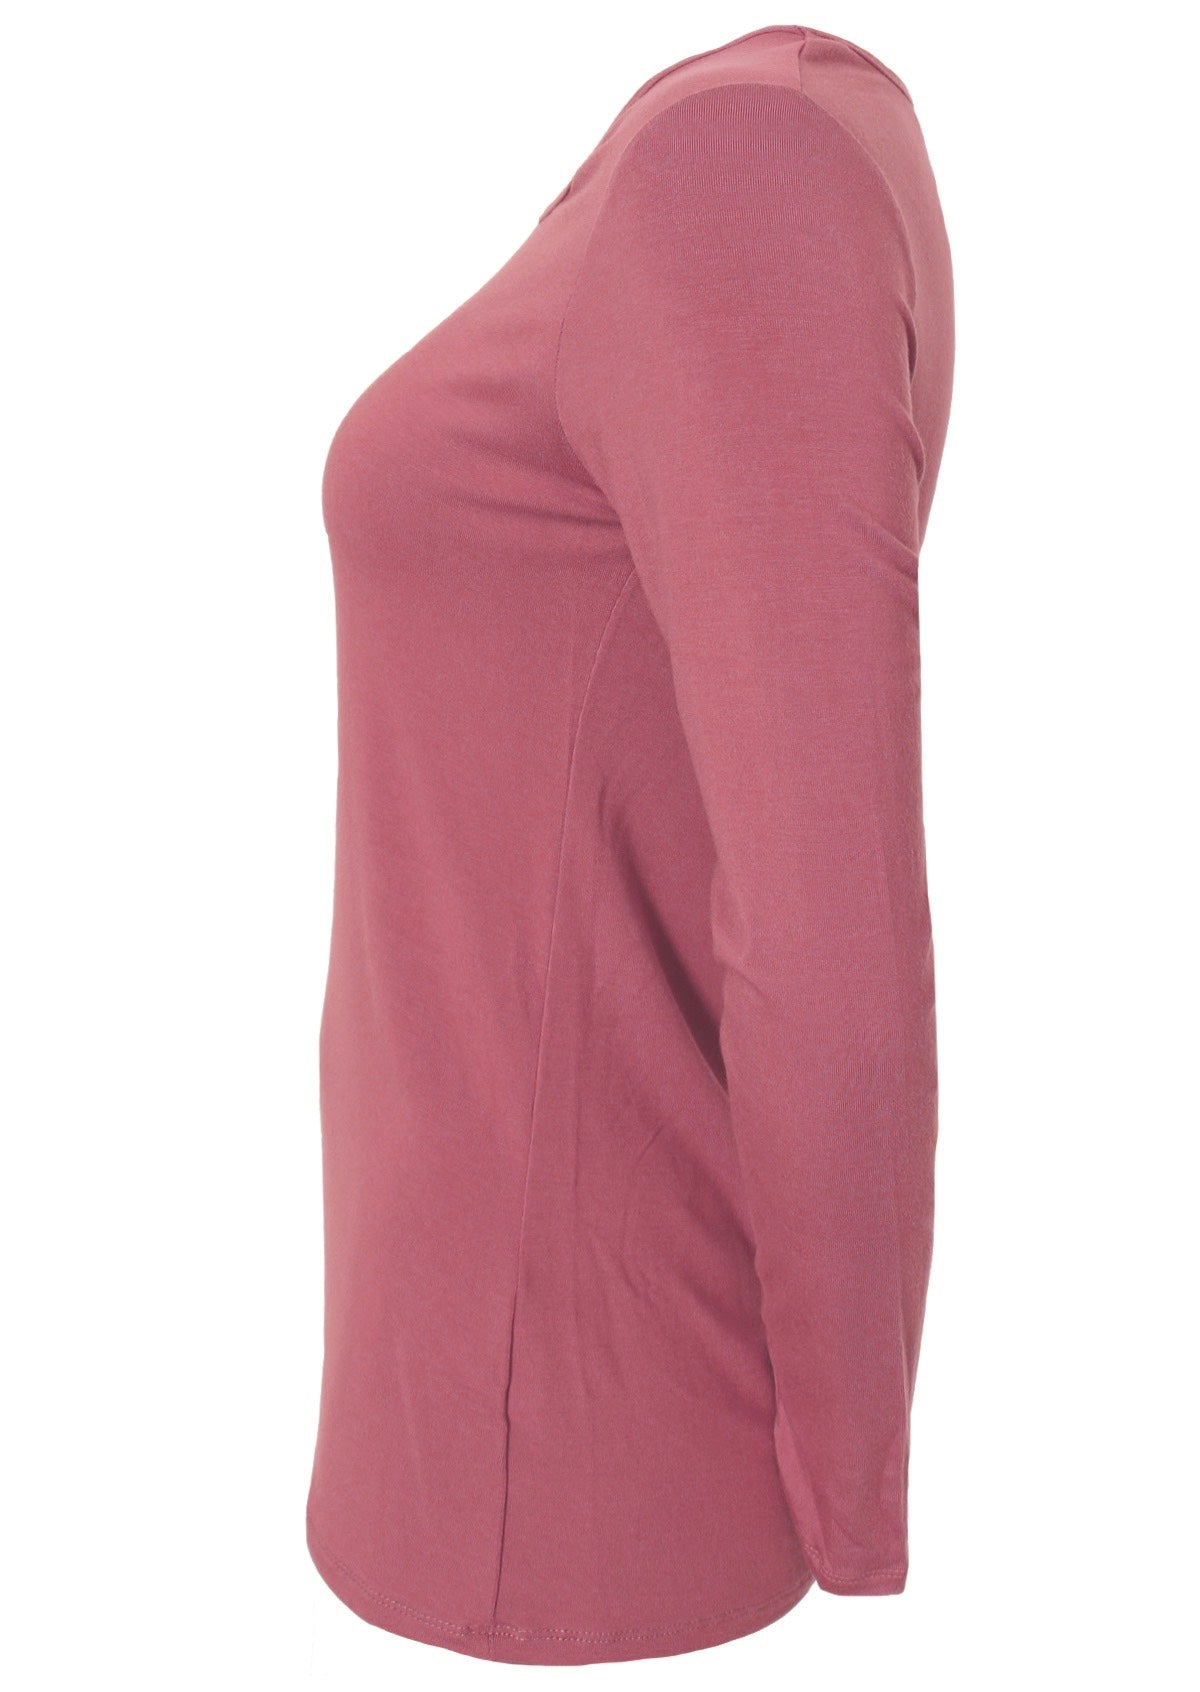 Long sleeve soft stretch rayon top in bubblegum pink